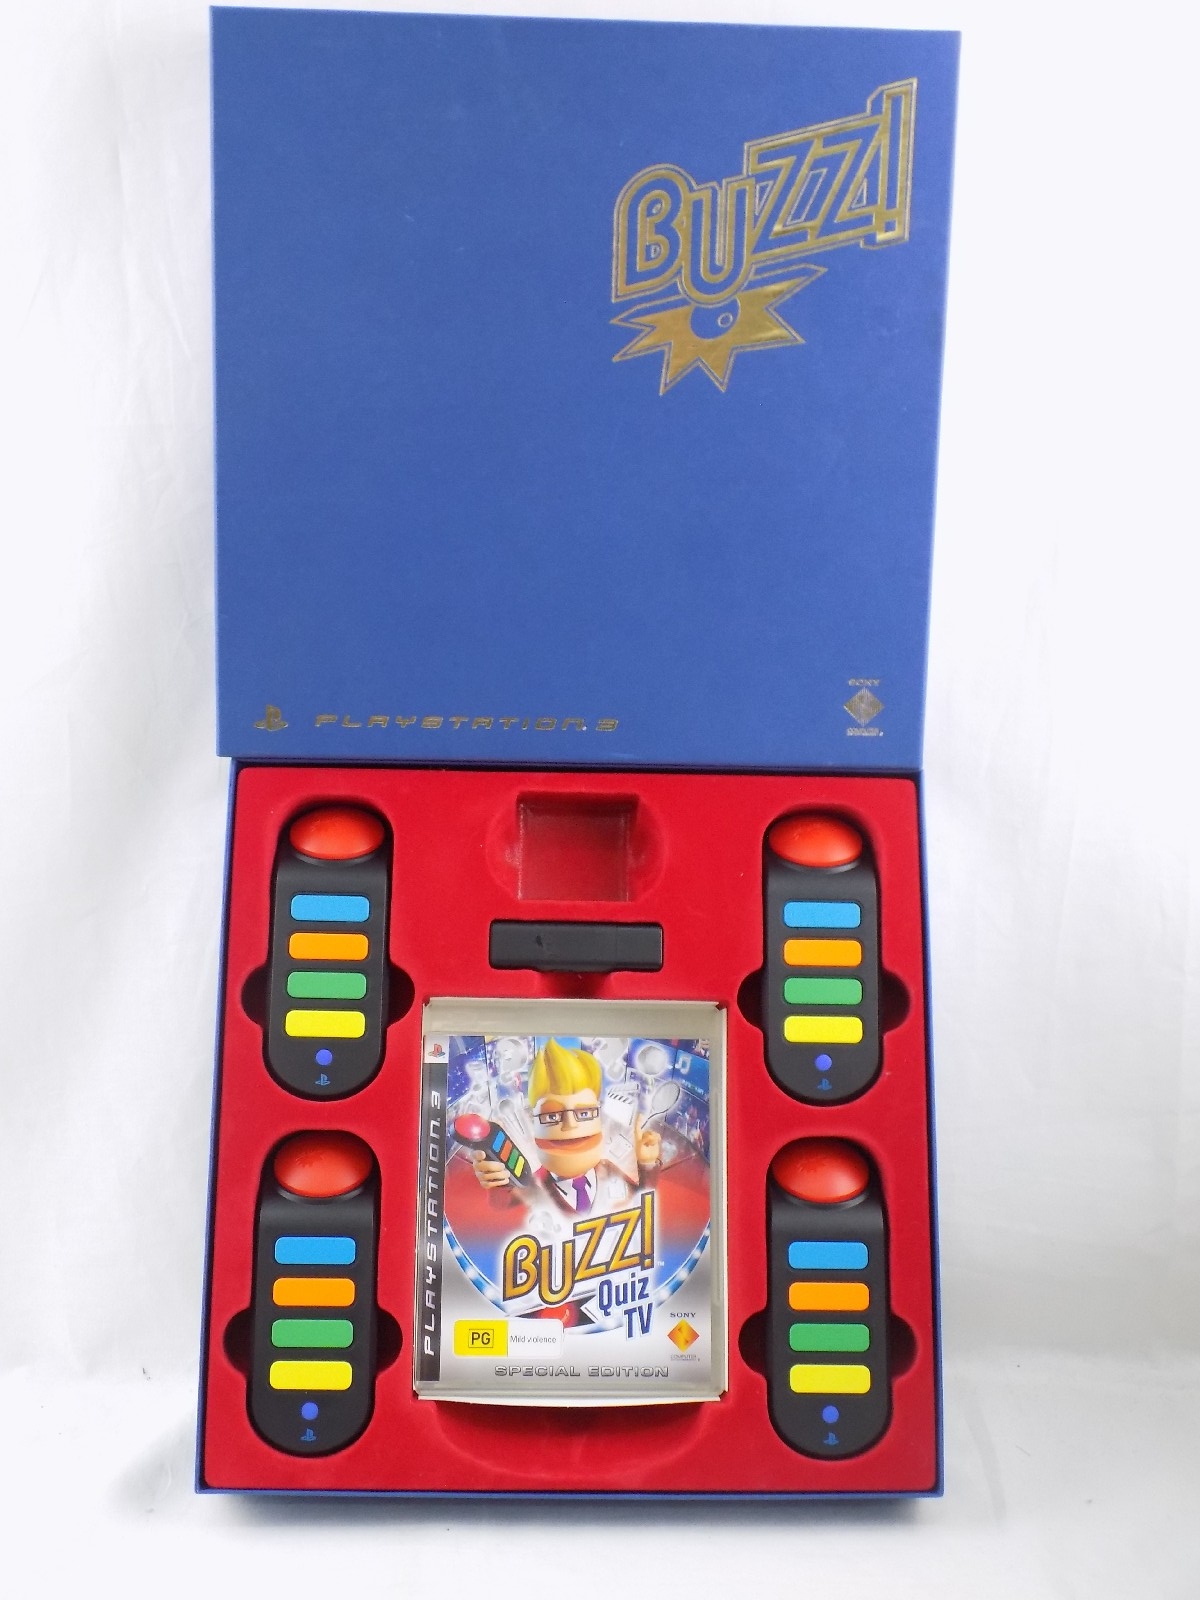 Like New Playstation 3 PS3 Buzz! Quiz TV Special Edition Boxset With Four  Controllers And Dongle - Starboard Games